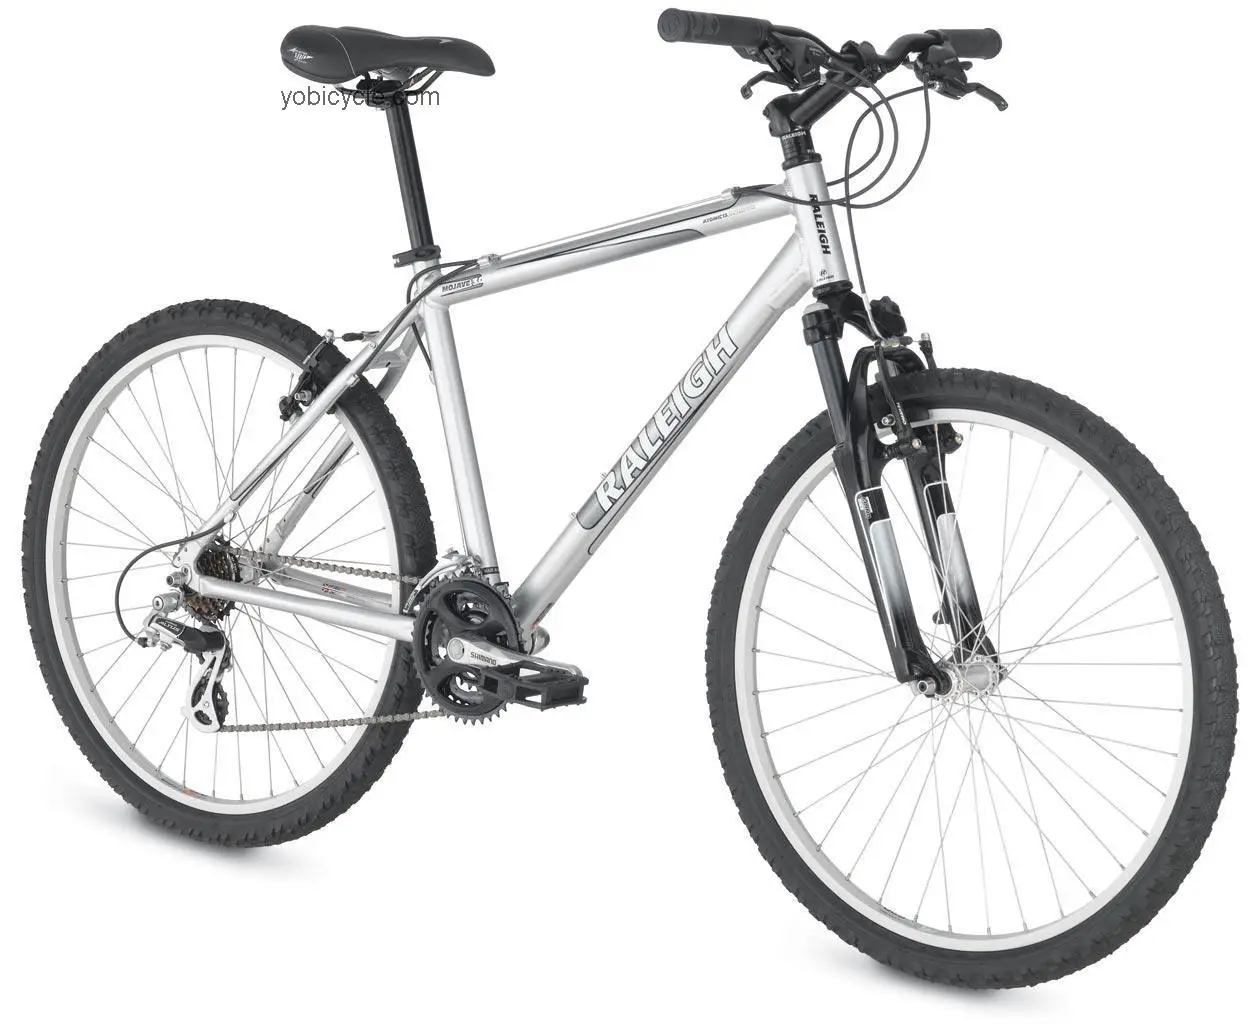 Raleigh Mojave 3.0 2009 comparison online with competitors